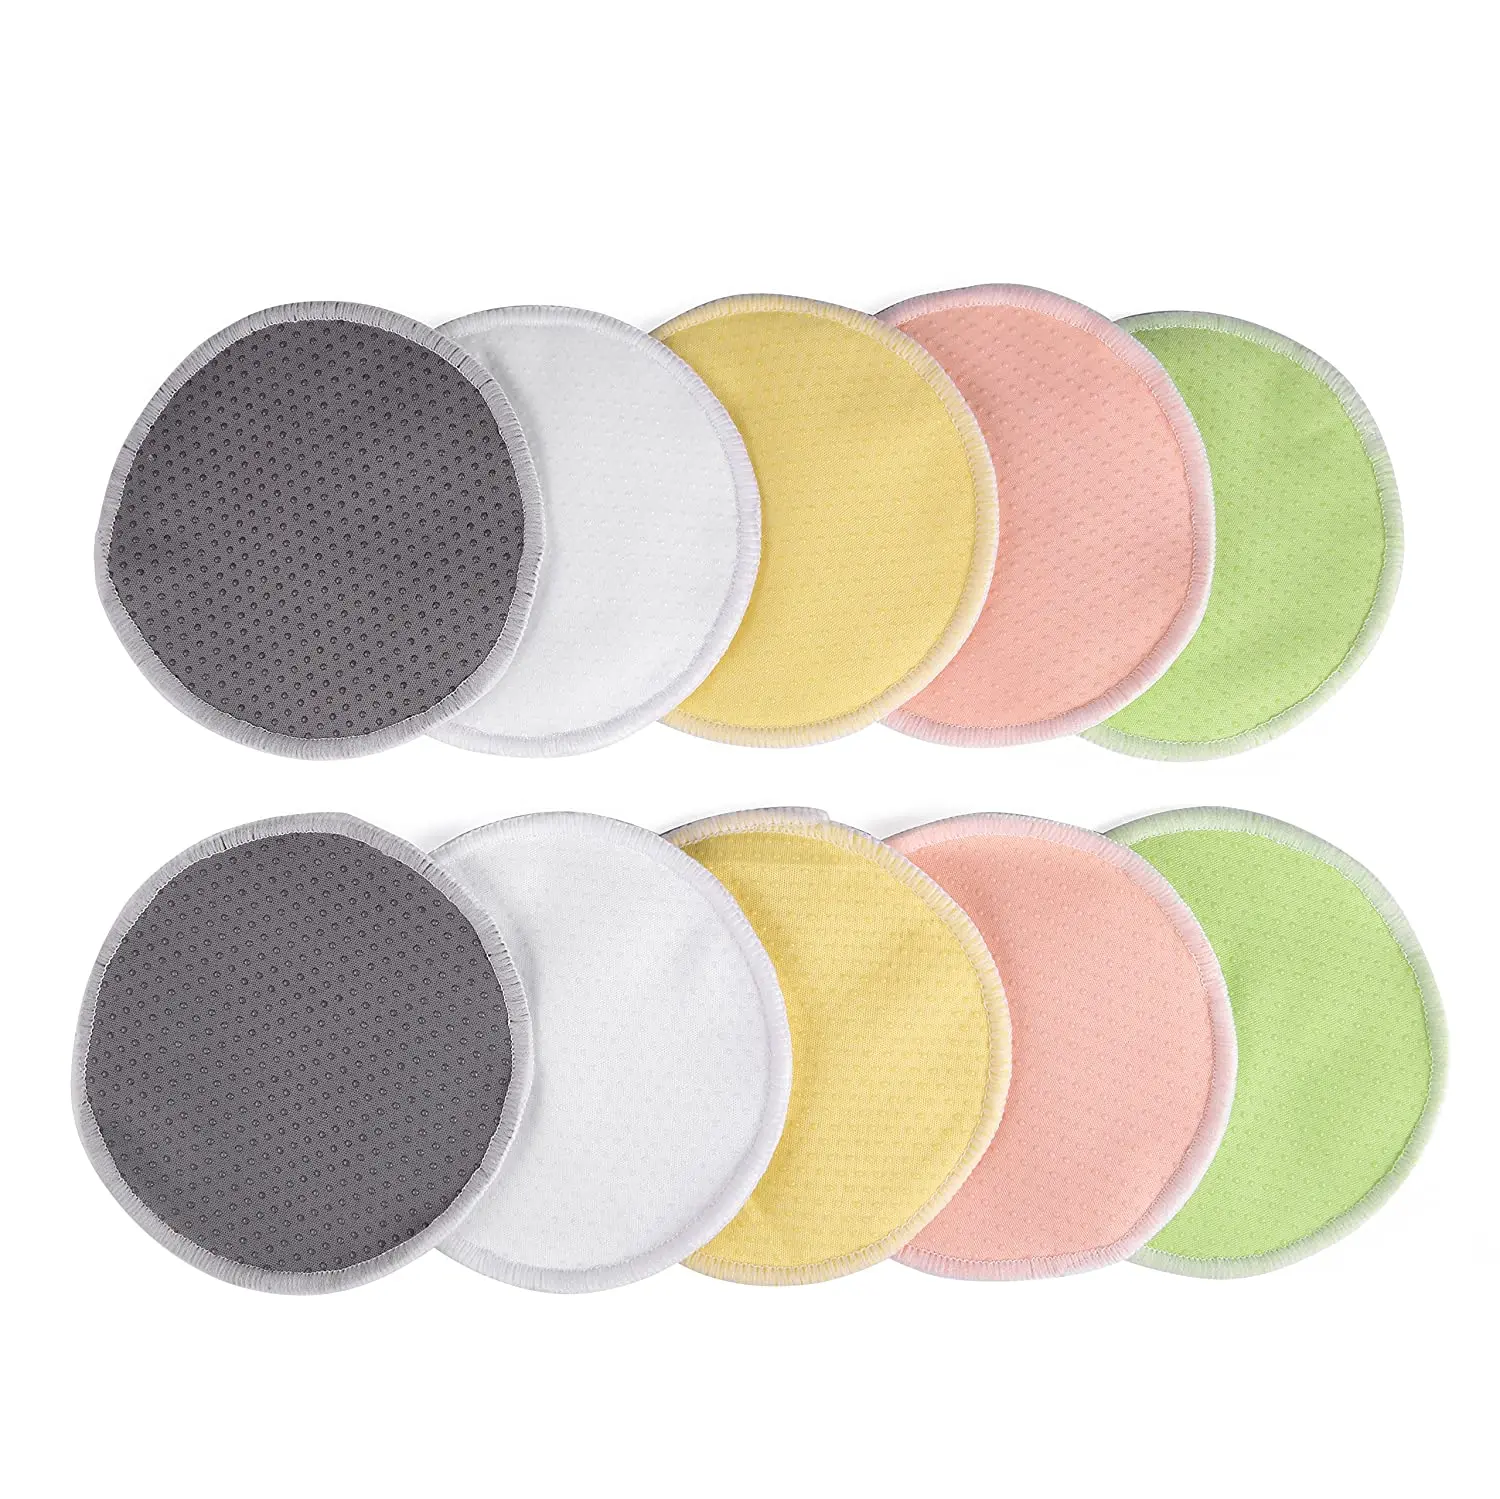 

High Quality Washable Organic bamboo Cotton Nursing Pads Reusable Spill-proof Breast Feeding Pads